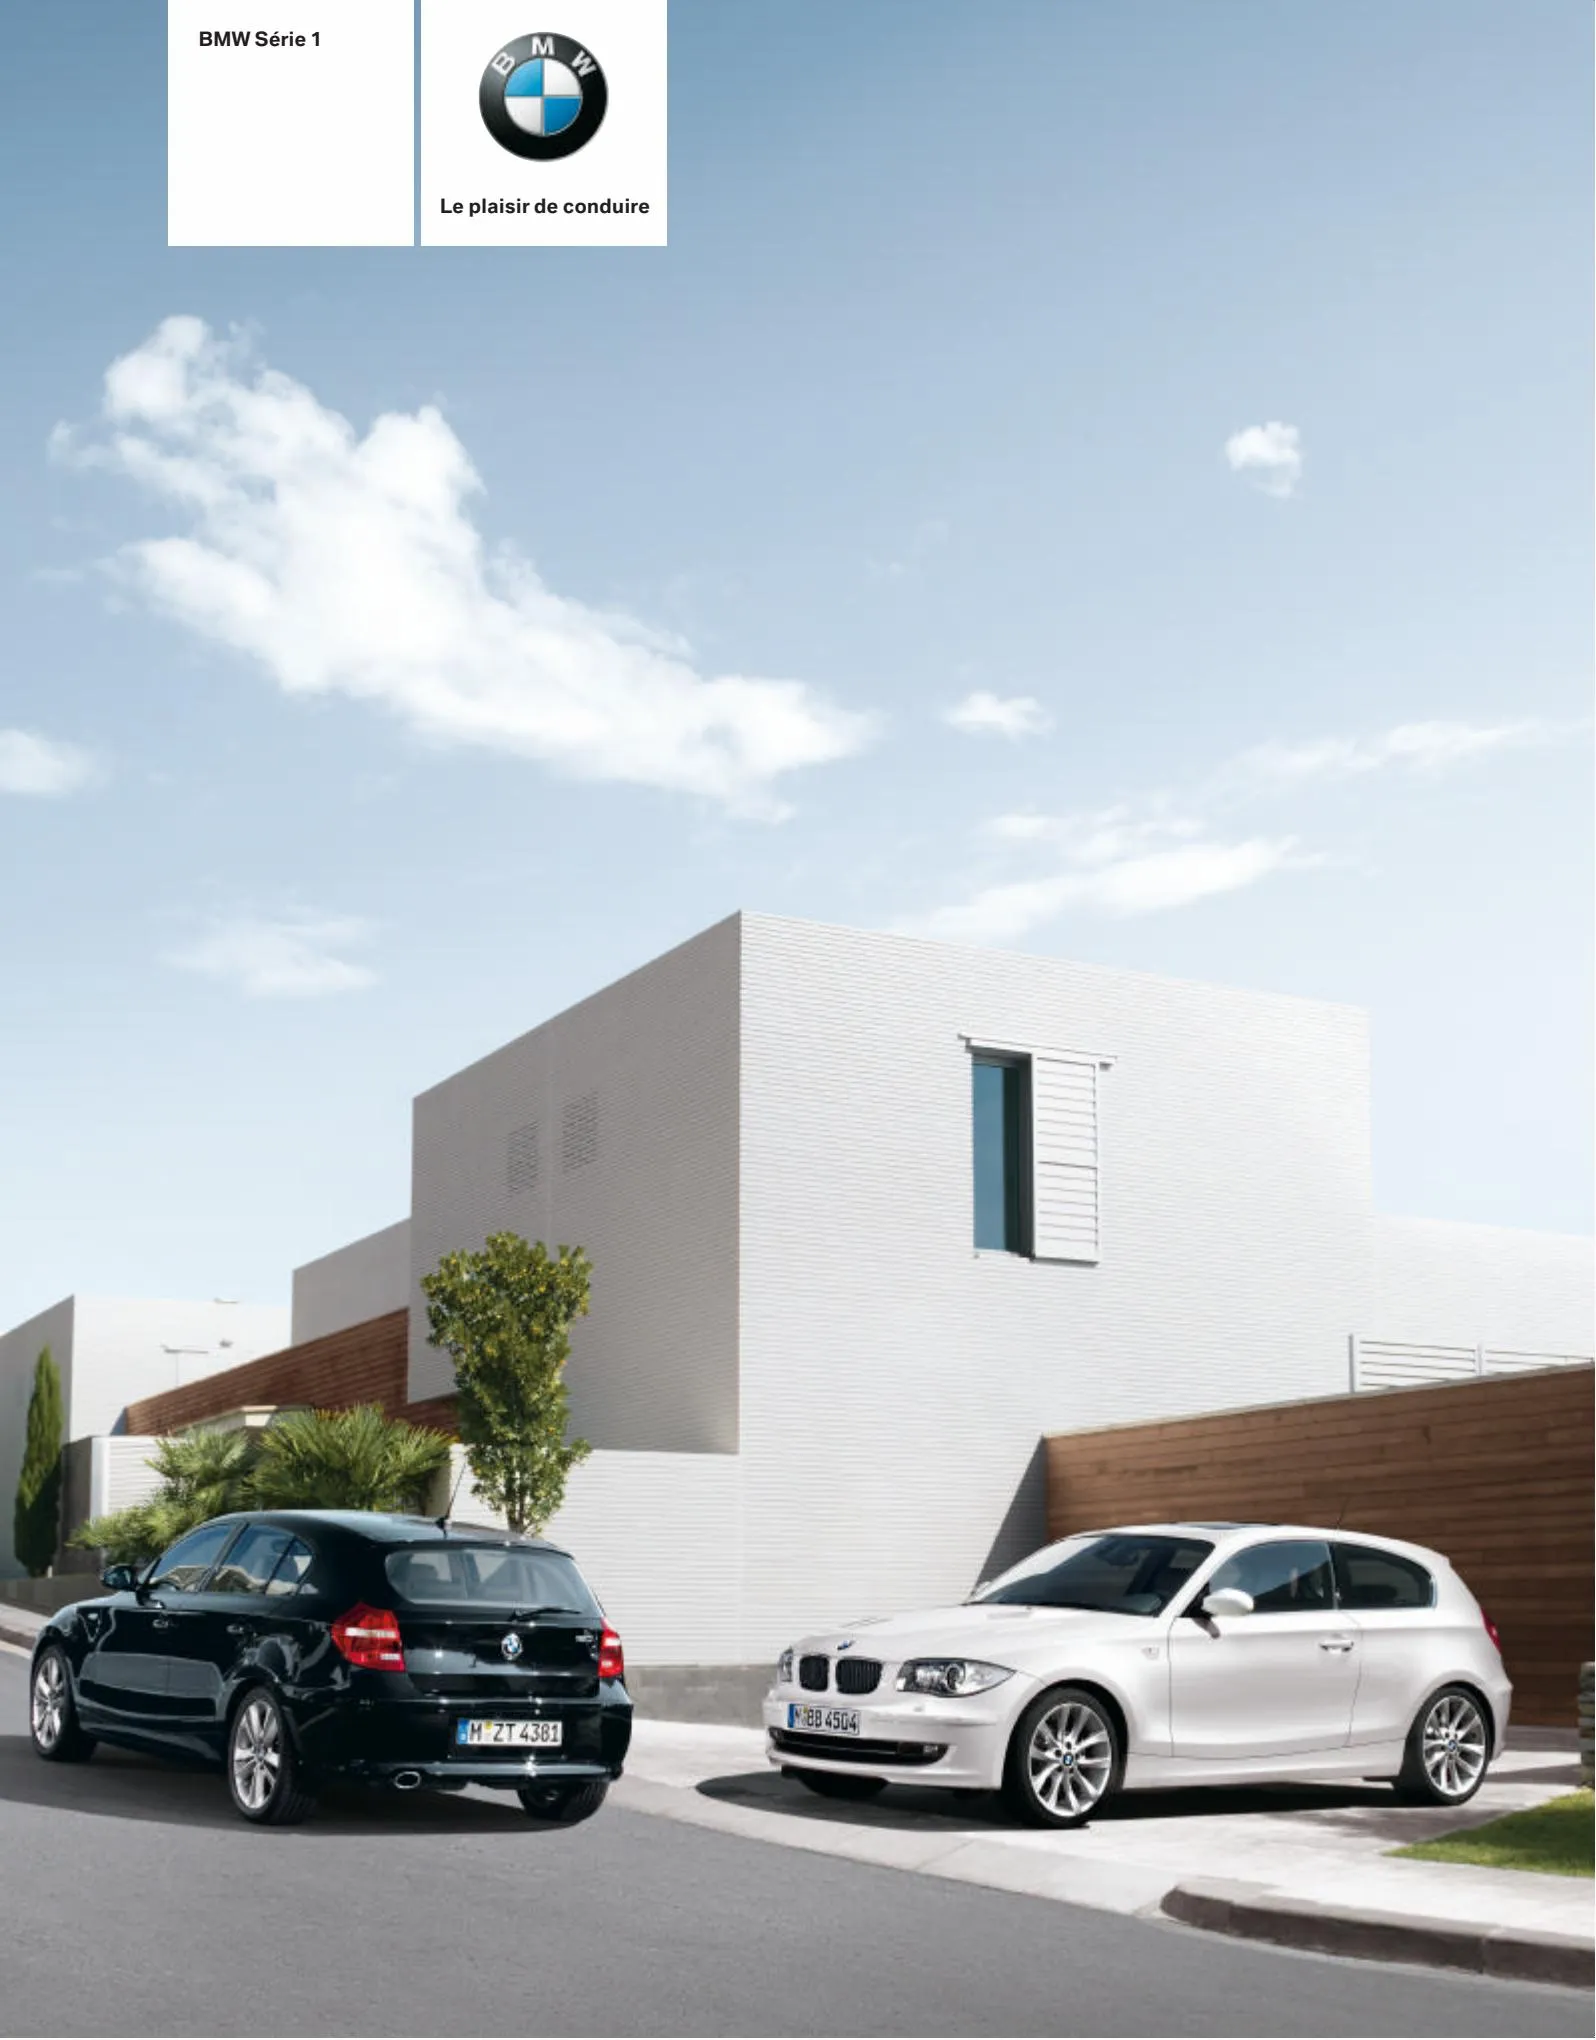 Catalogue BMW Serie1 Berline, page 00001